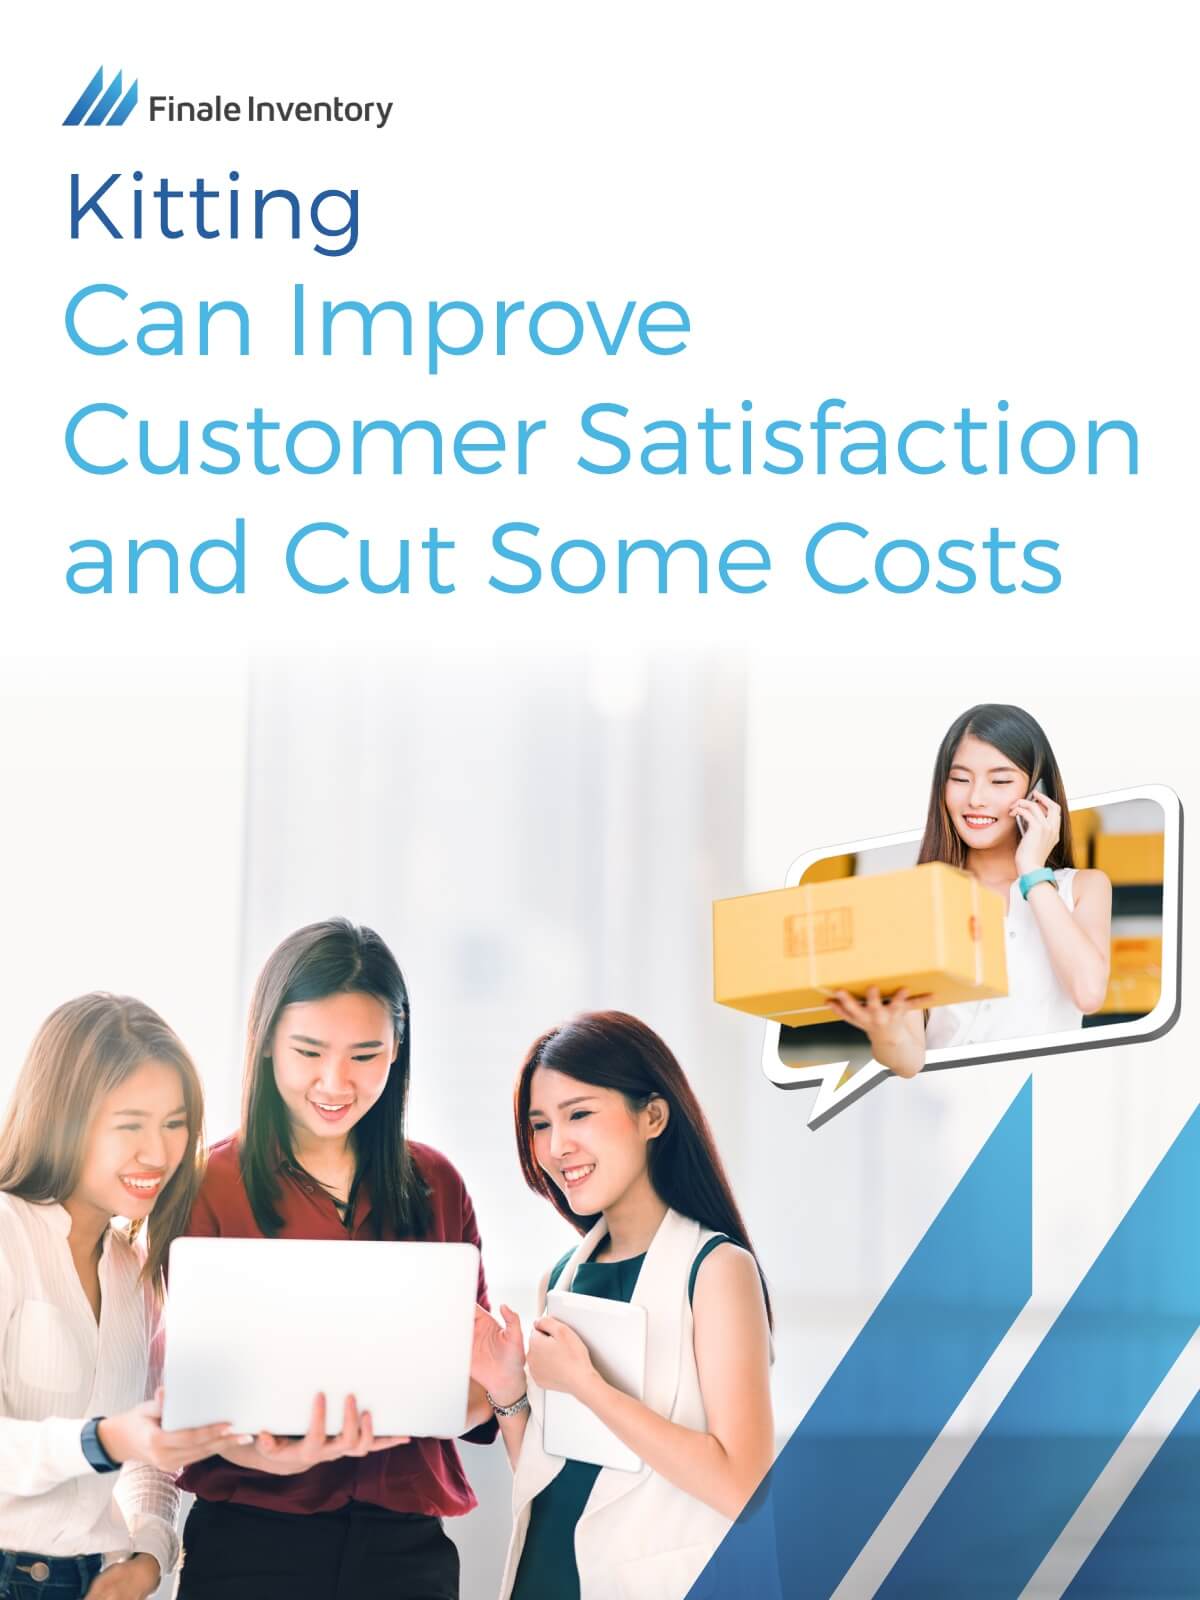 Kitting Can Improve Customer Satisfaction and Cut Some Costs